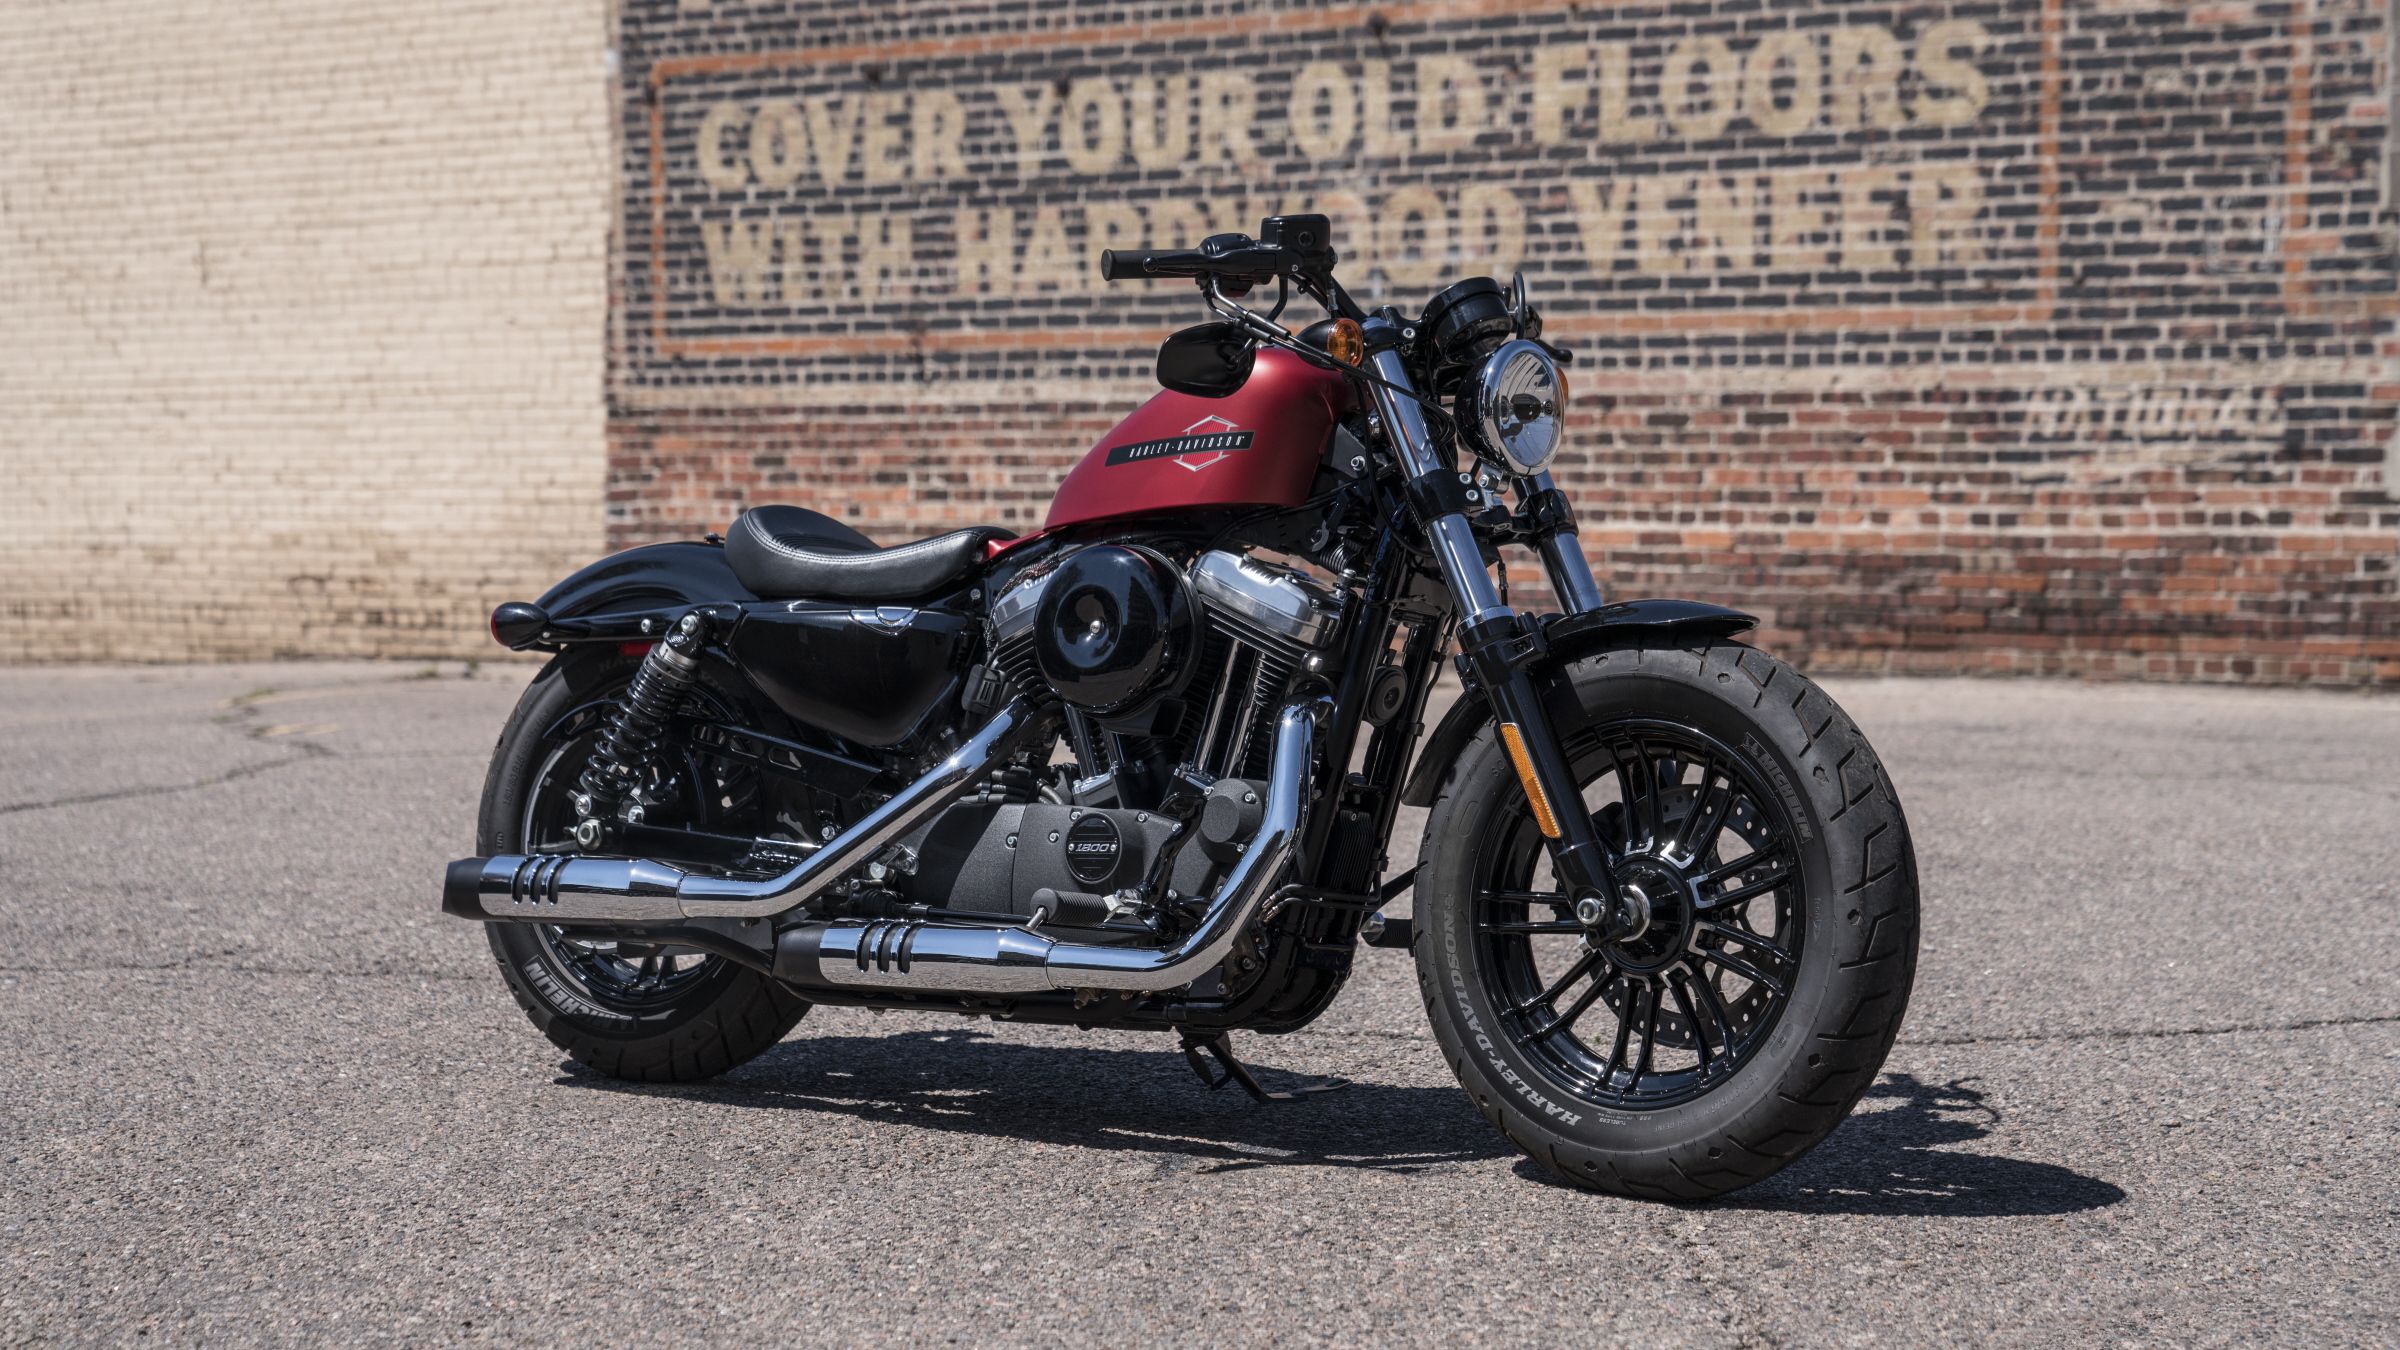 2019 Harley Davidson Forty Eight Picture, Photo